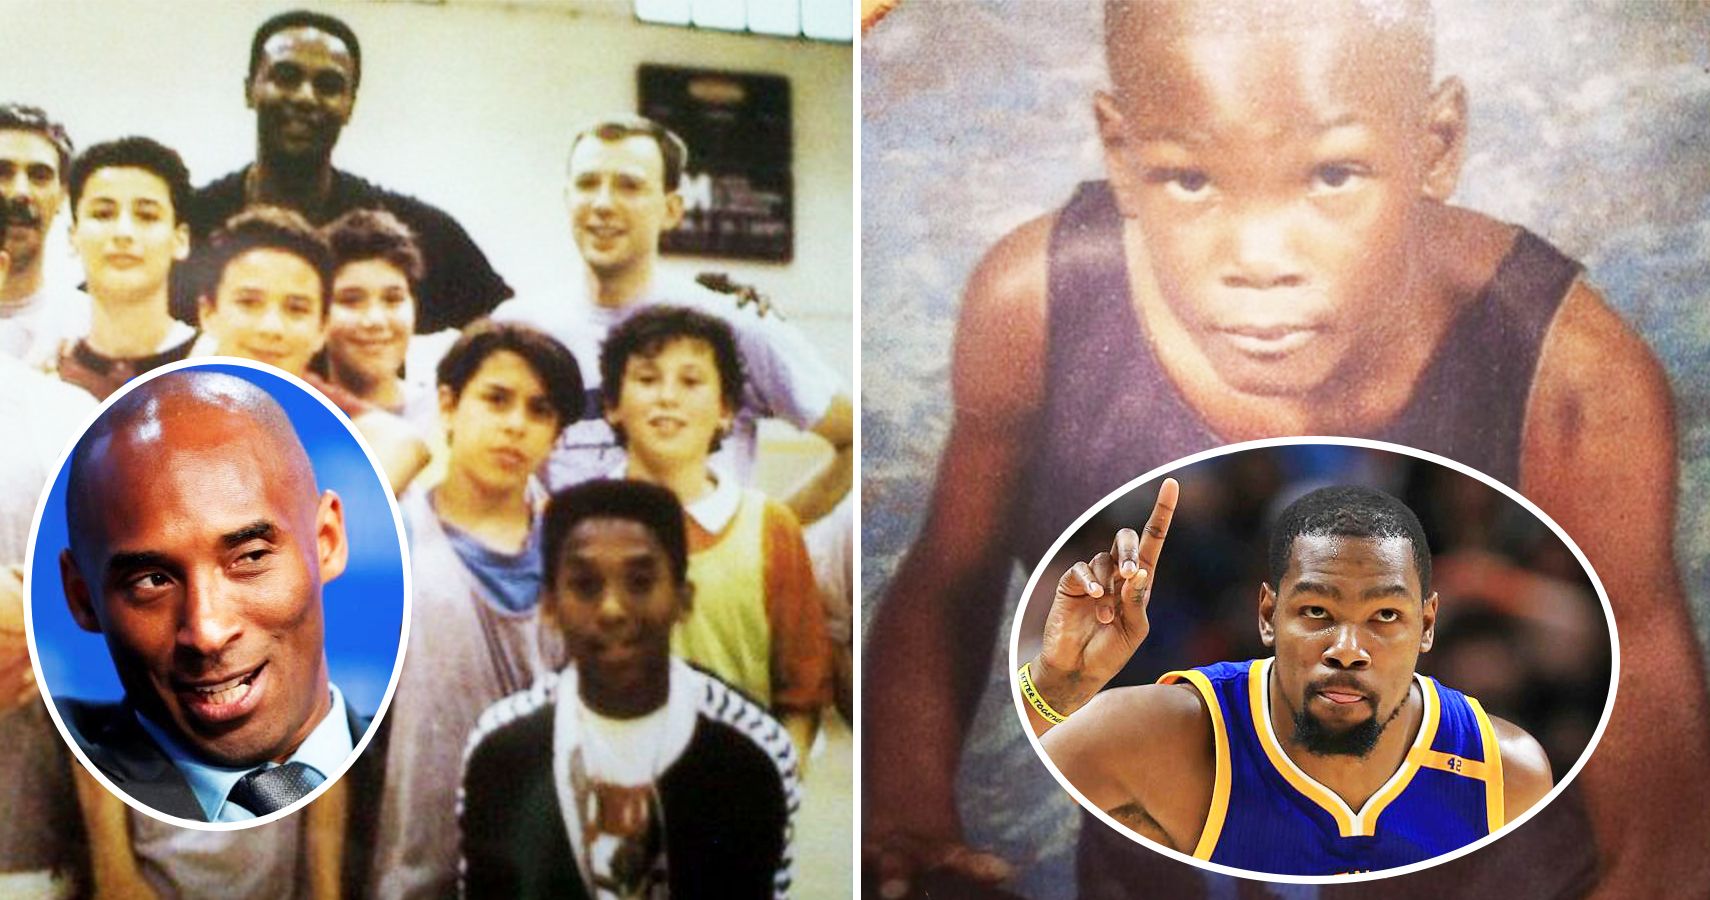 20 Childhood Photos Of NBA Stars That Are Almost Unrecognizable1710 x 900